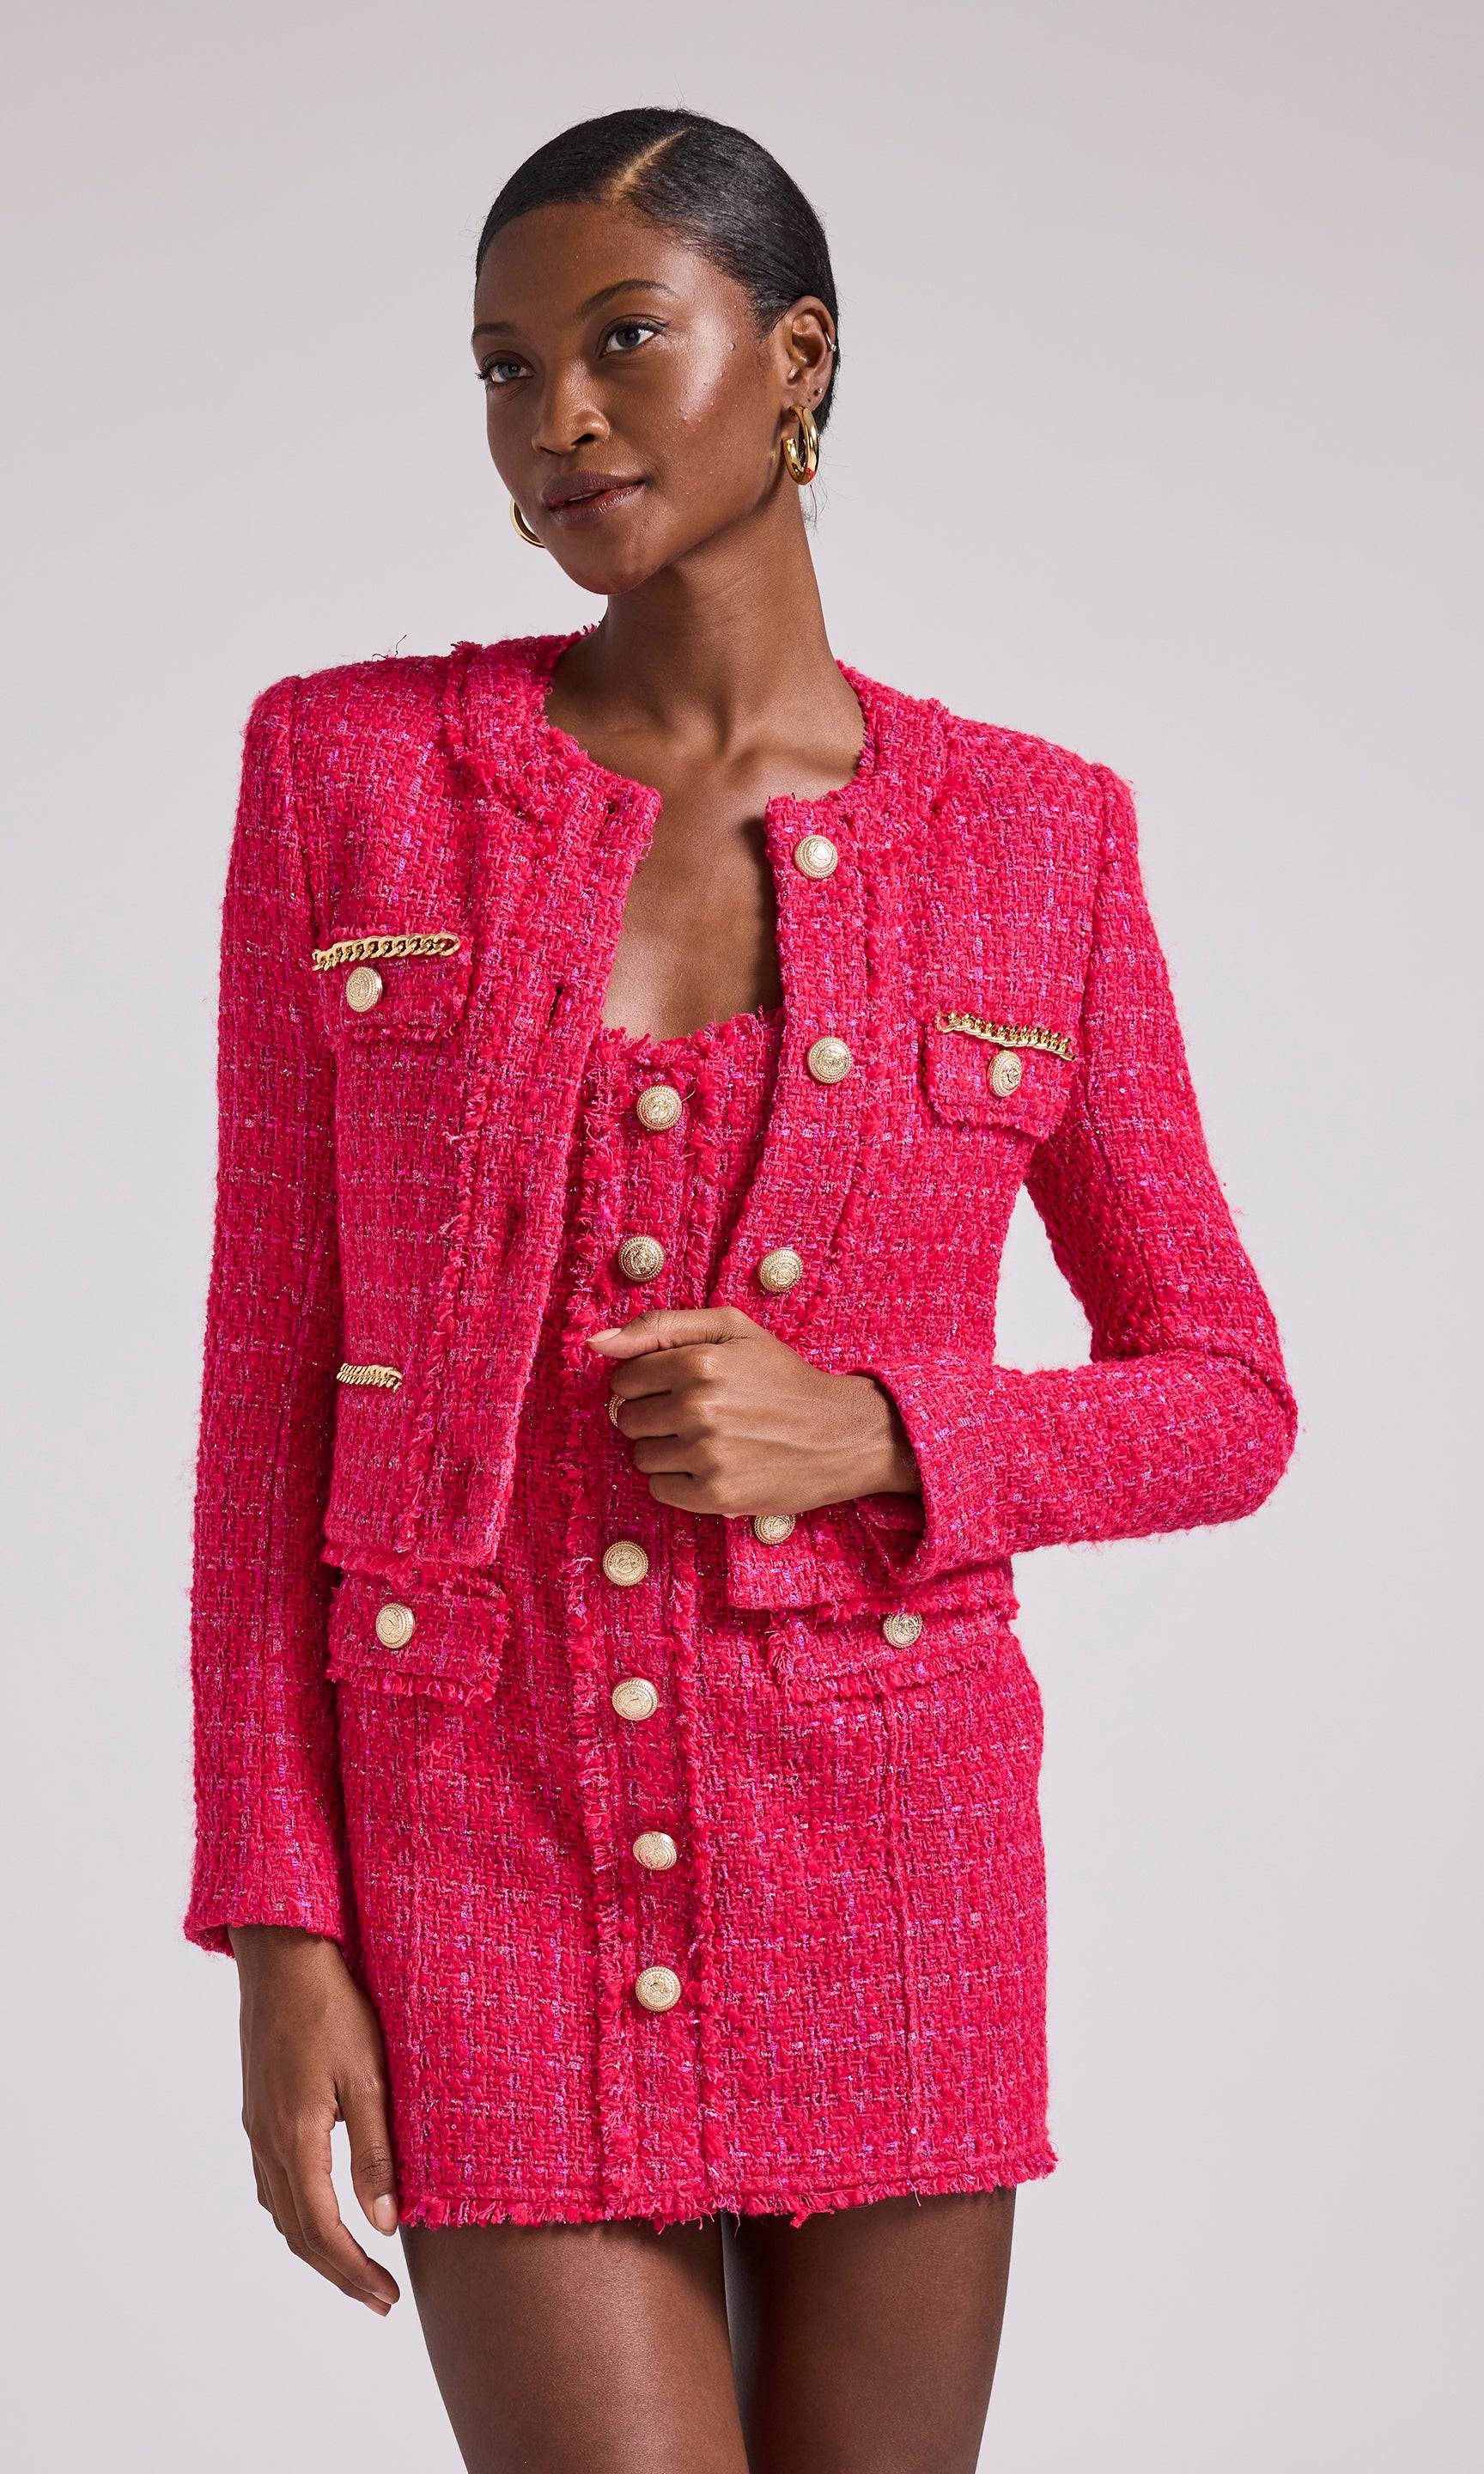 chanel like jacket red